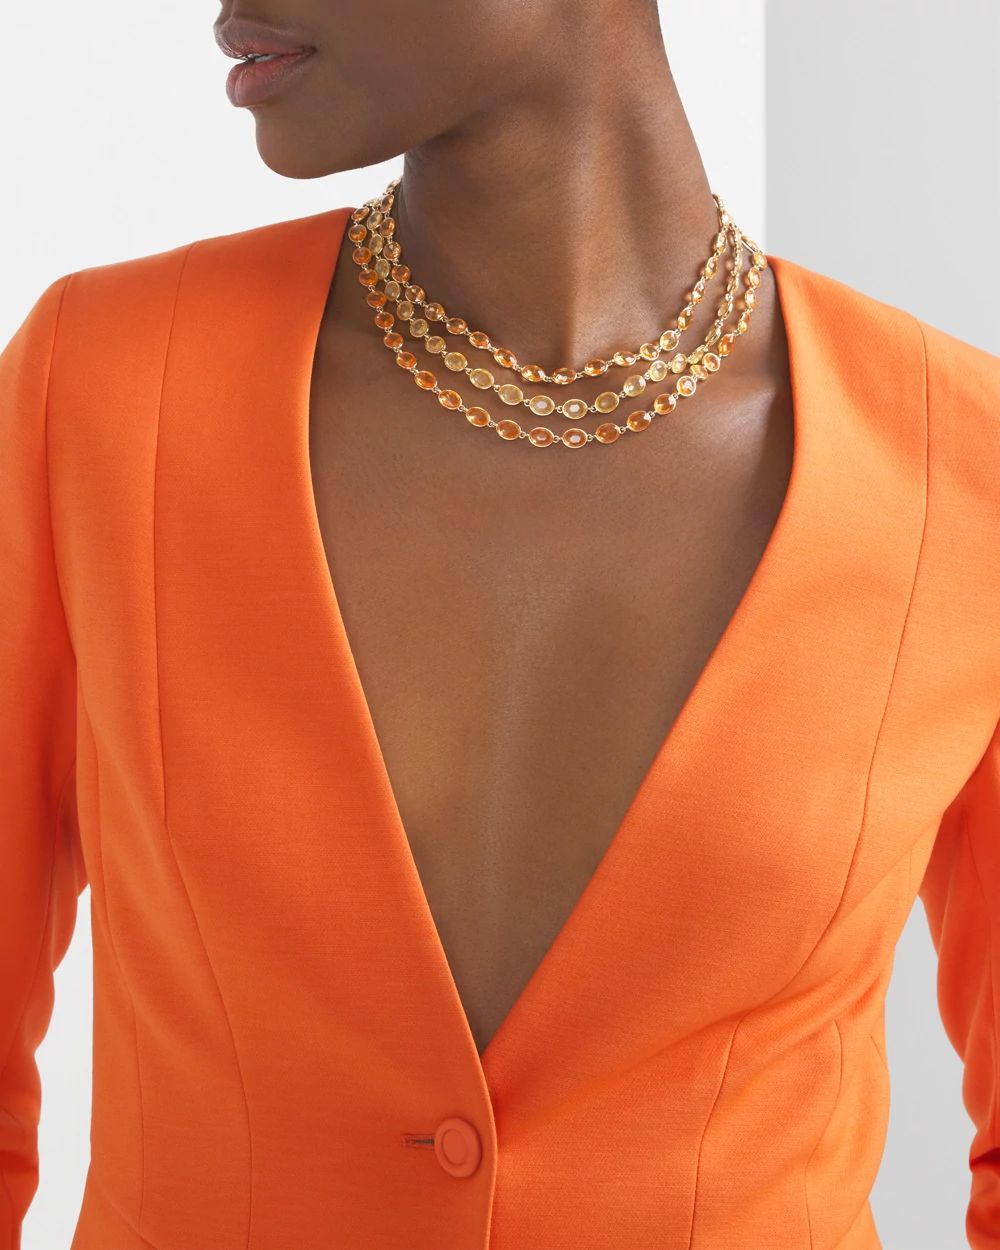 Gold + Peach Crystal Necklace